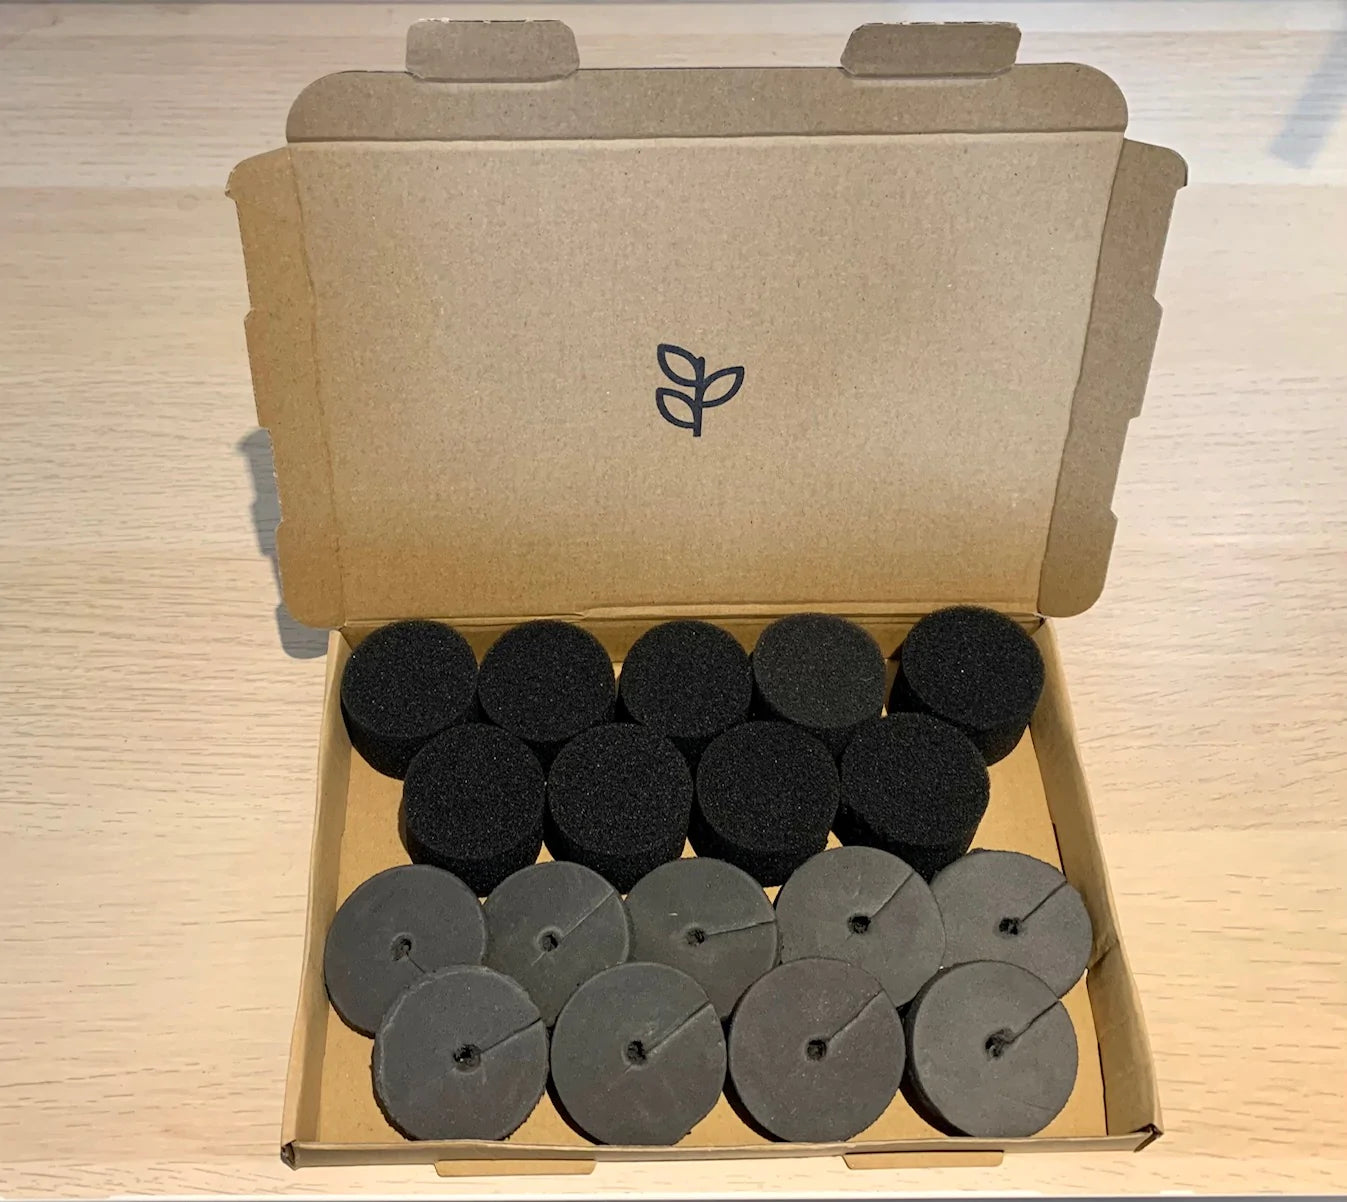 Mixed Pack of 9 Open Cell Cloning Collars and 9 Closed Cell Pucks (18 total) Free Standard Postage Vertical Horizon Hydroponics